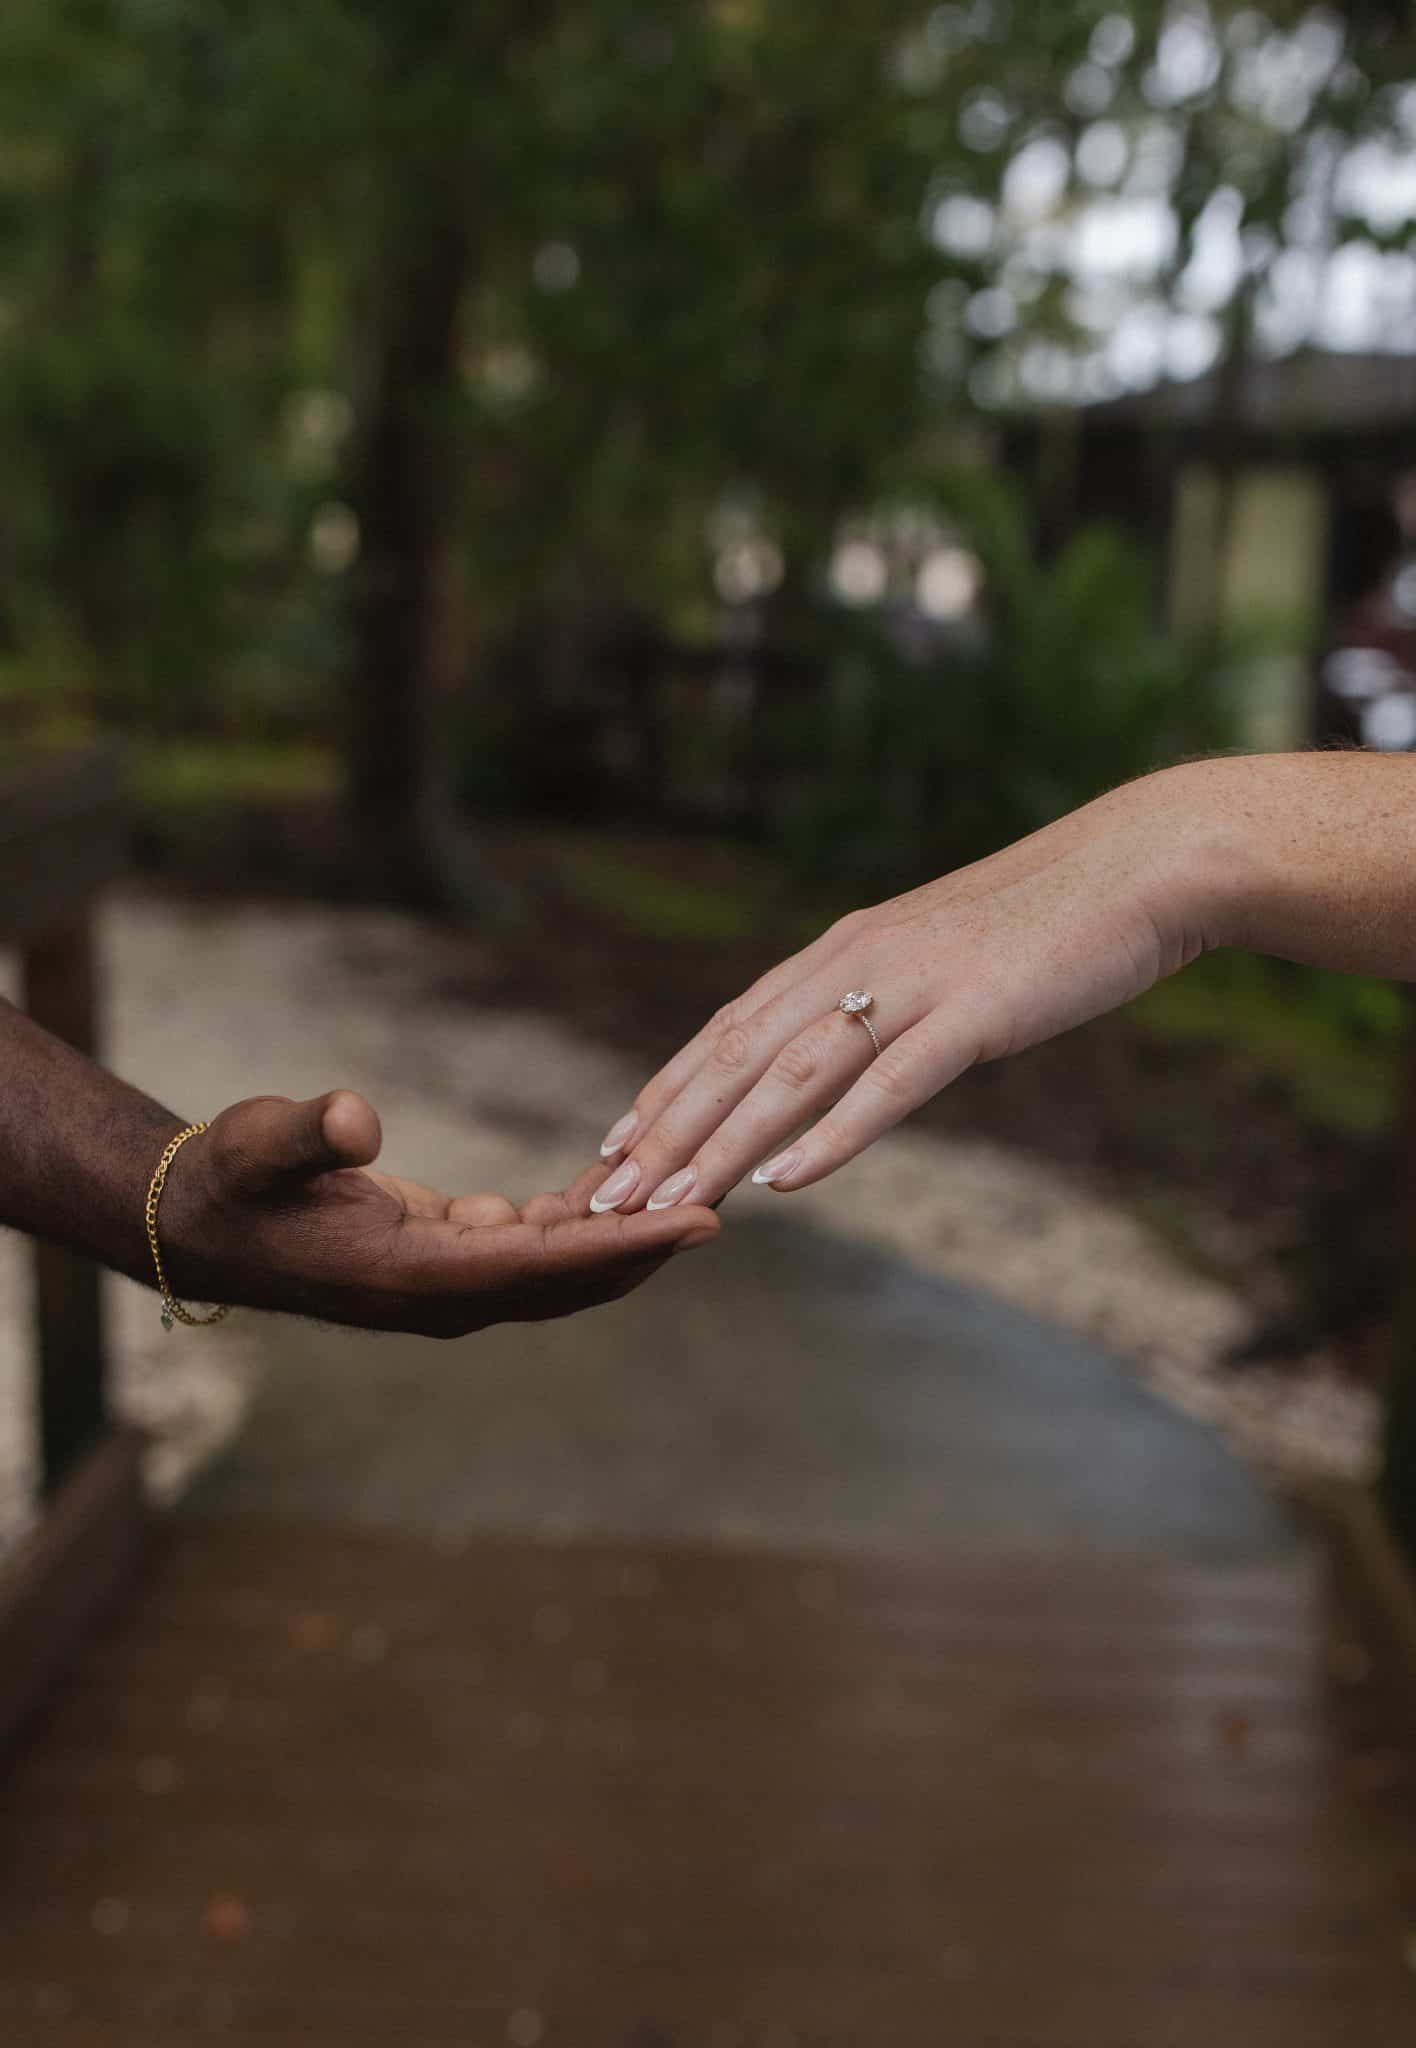 two hands touching fingertips in front of outdoor sidewalk